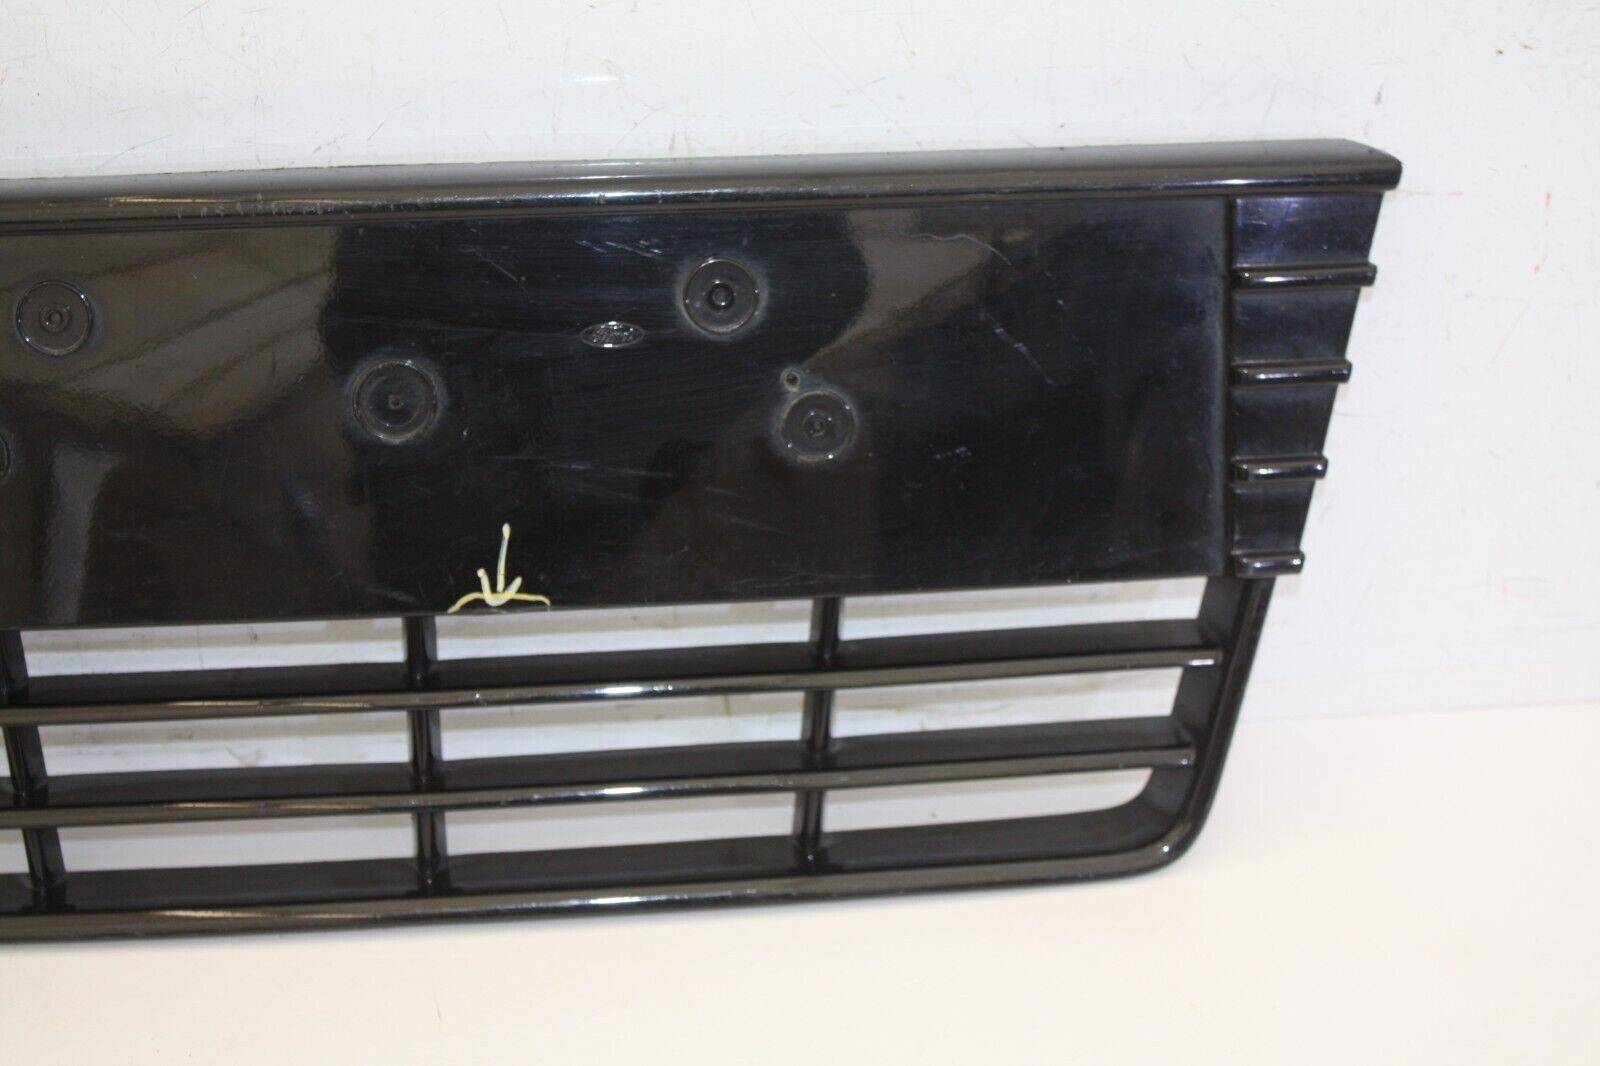 Ford-Focus-Front-Bumper-Grill-2011-TO-2014-BM51-17K945-E-Genuine-SEE-PICS-176238481574-2